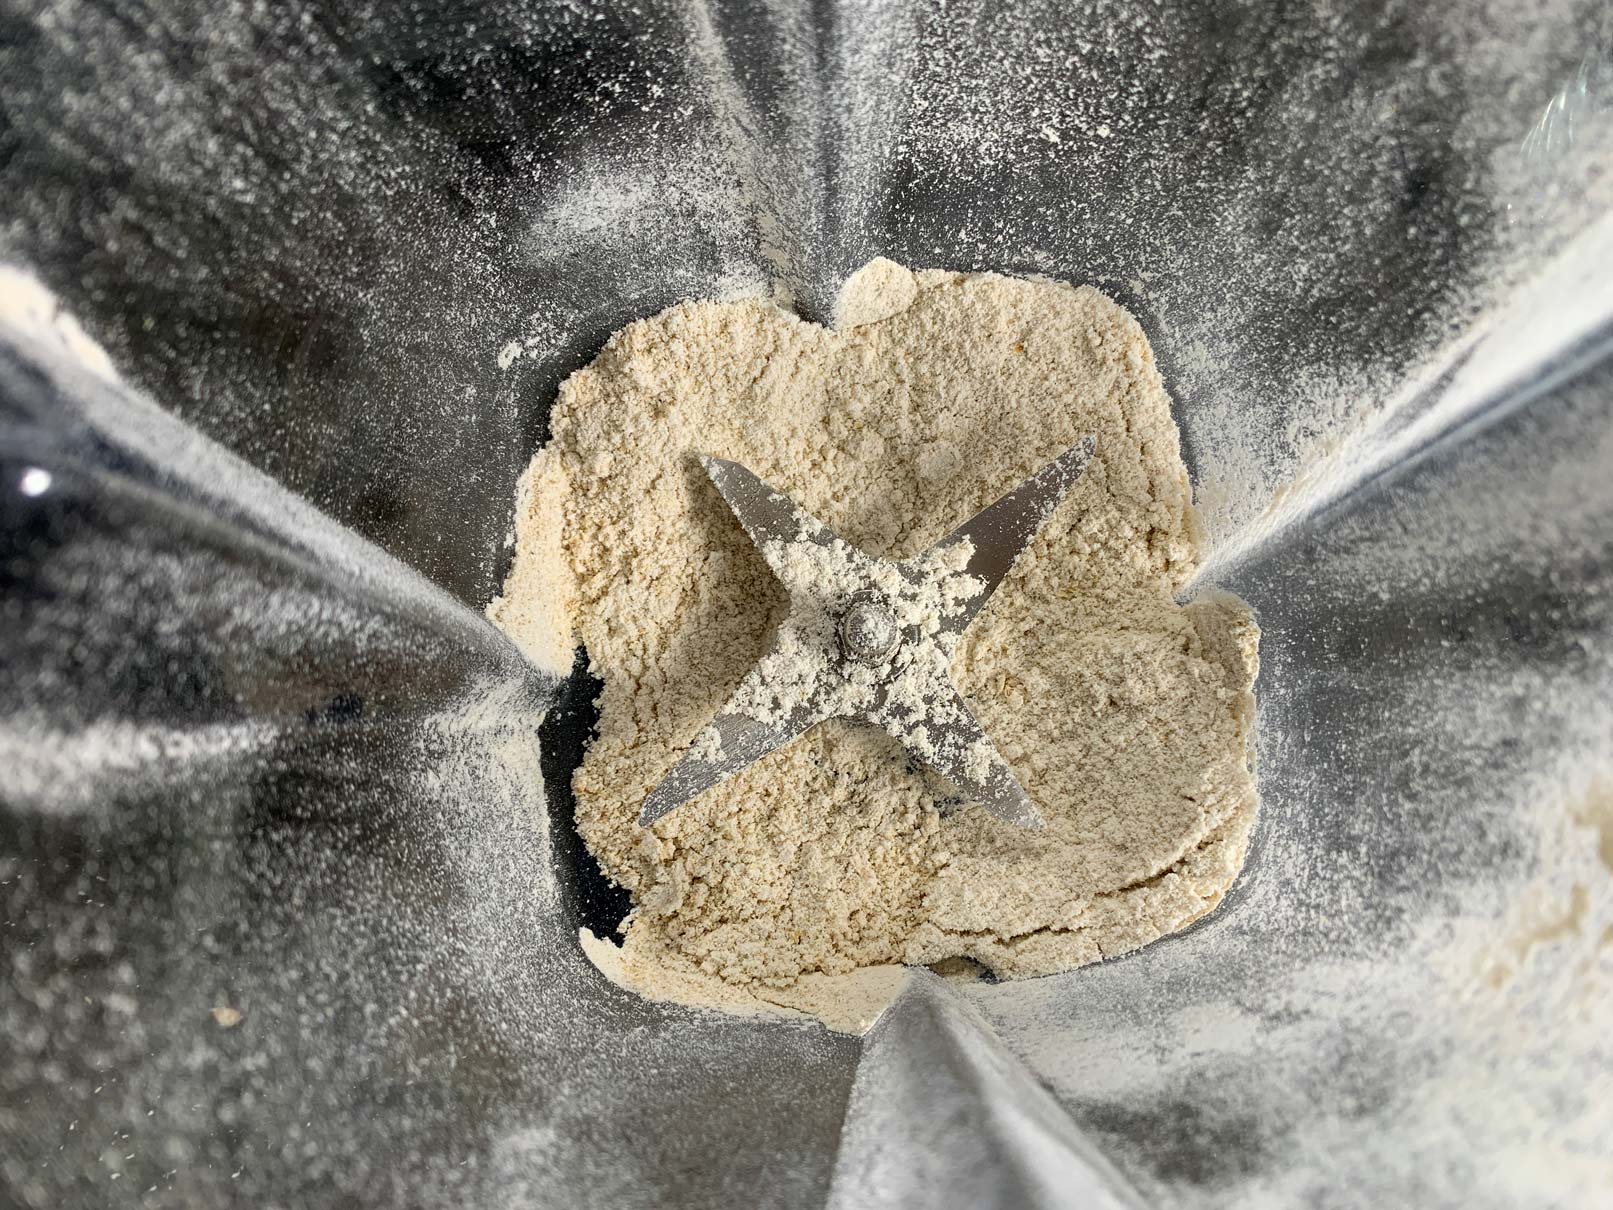 Oats pulverized to powder in a blender